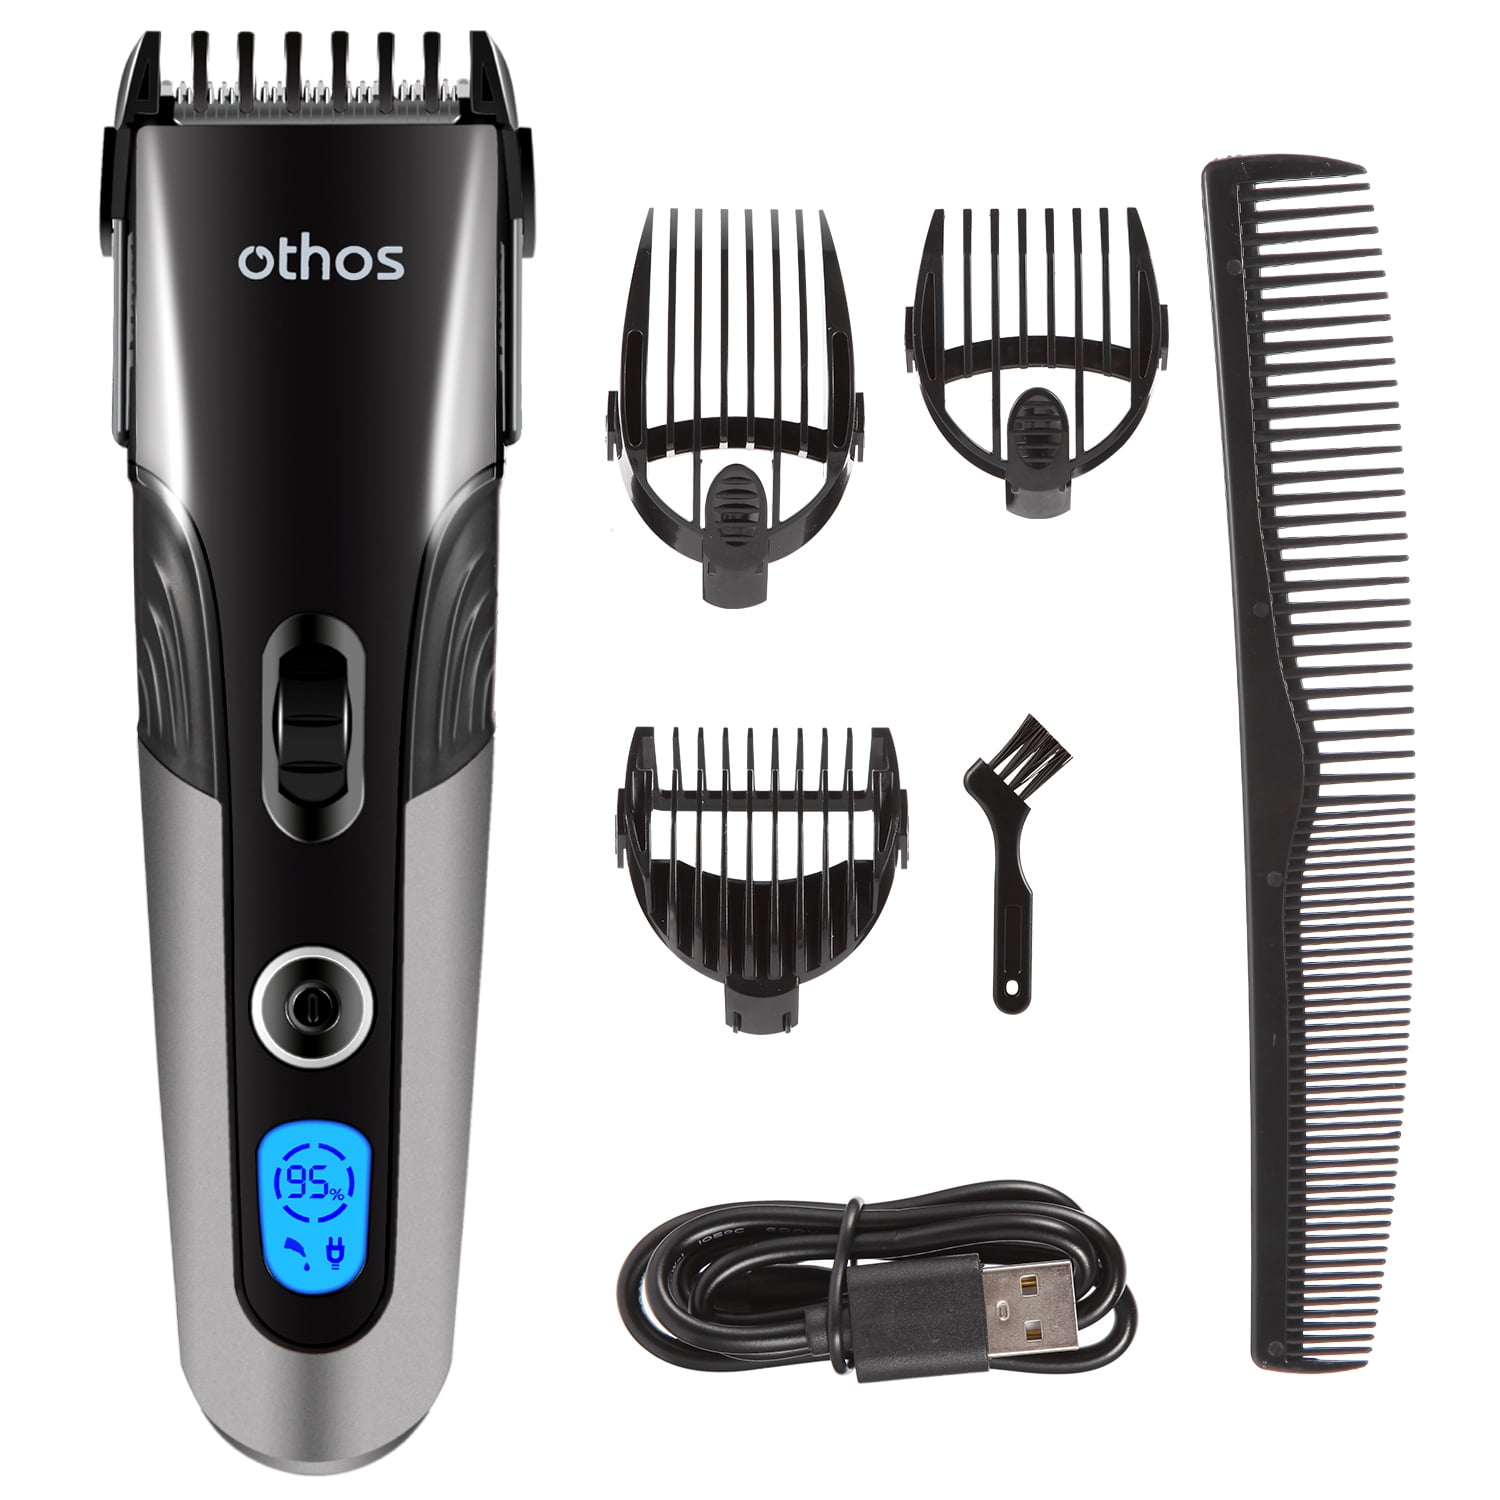 Othos Electric Cordless Hair Clippers Haircut Machine Hair Cutting Tools  Hair Trimmer Razor Kit for Men lithium battery operated chargeable guide  comb with different length LCD display stand base 